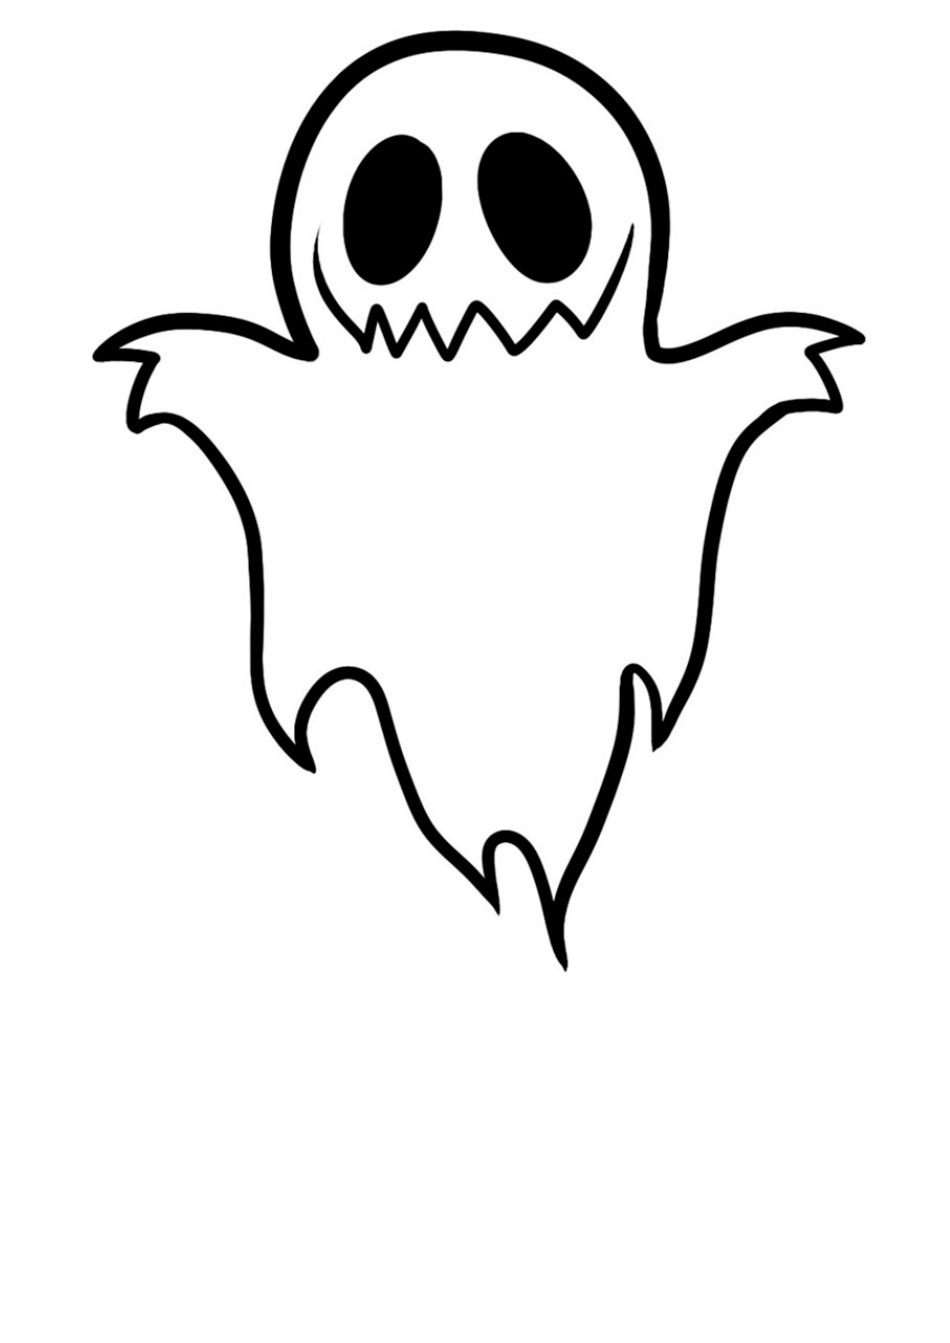 Halloween Coloring Sheet - Ghost, Page 1